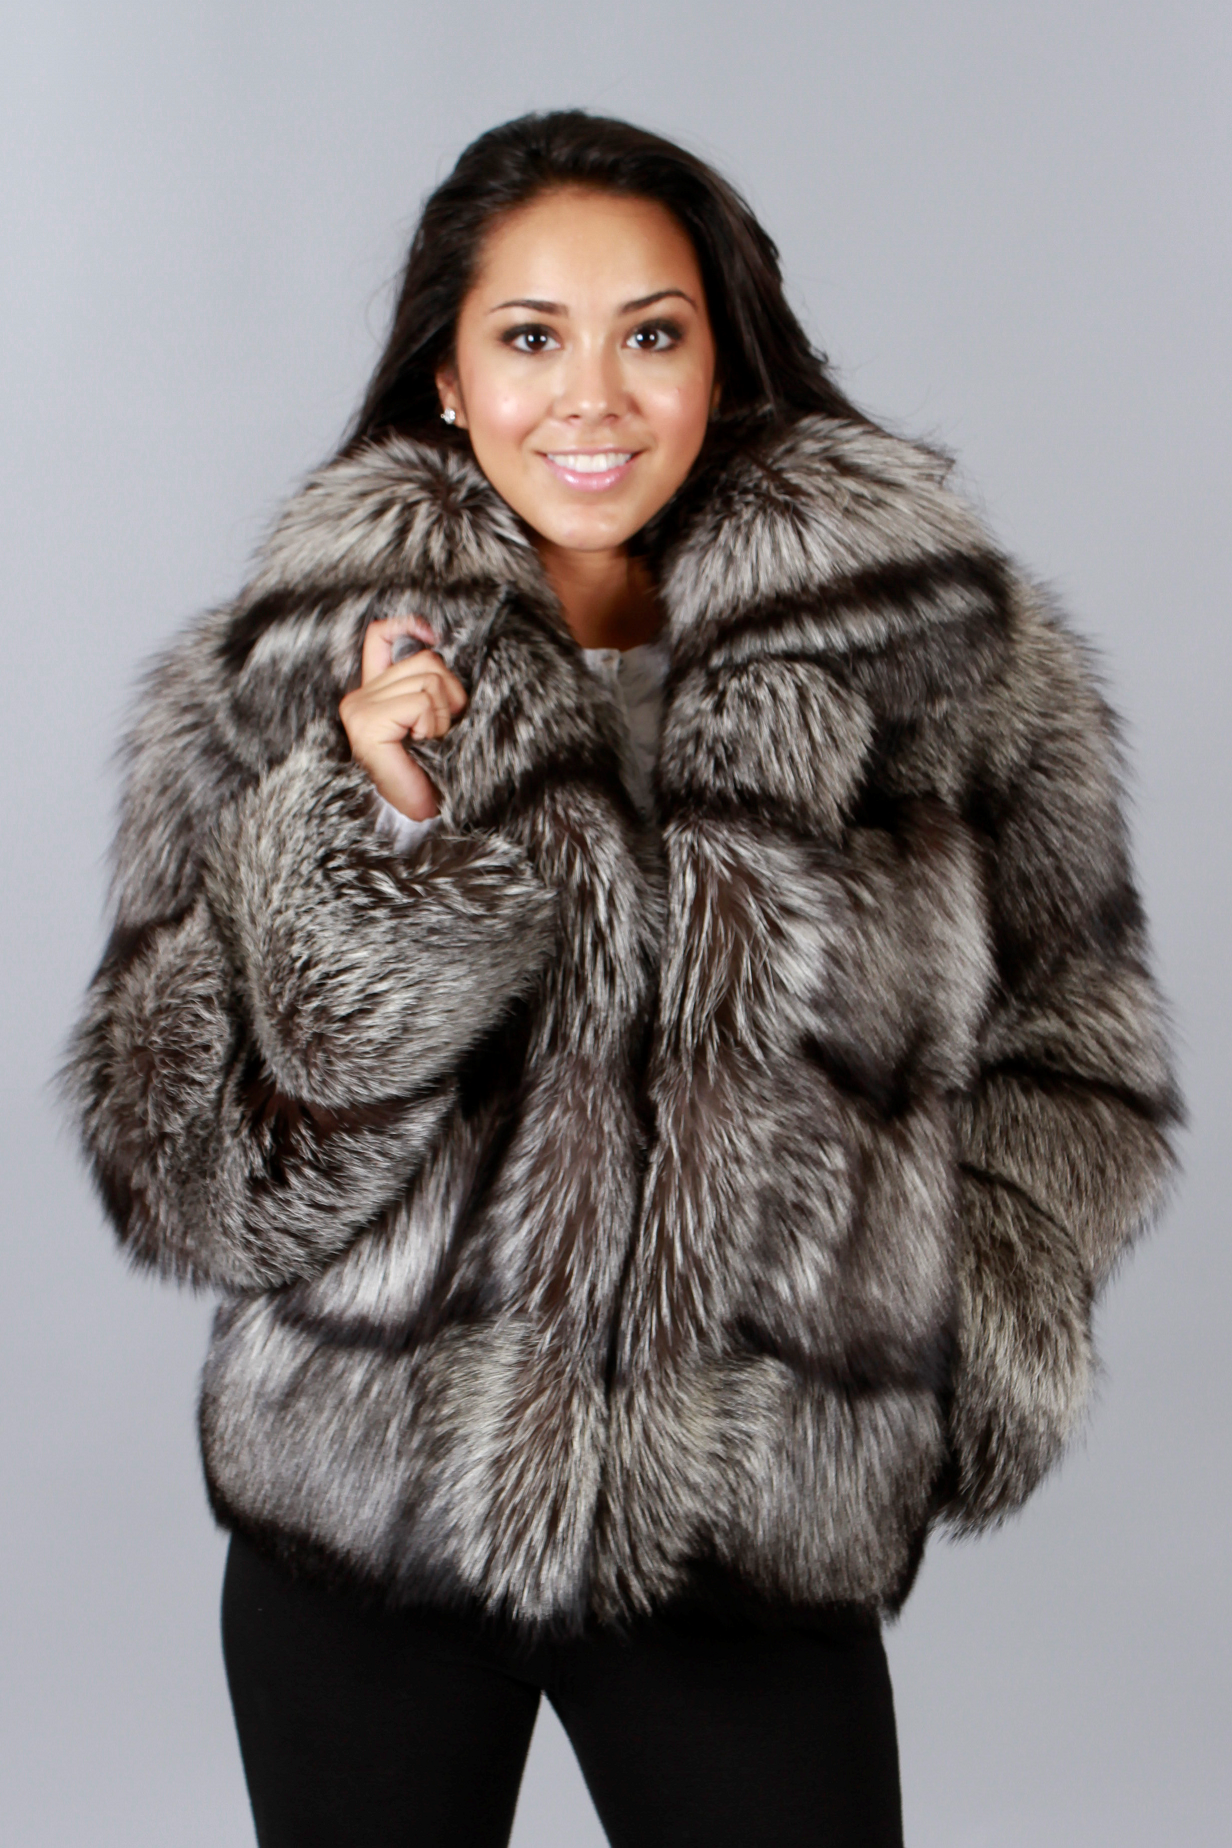 Fox Fur Coats Are a Great Addition to Your Wardrobe